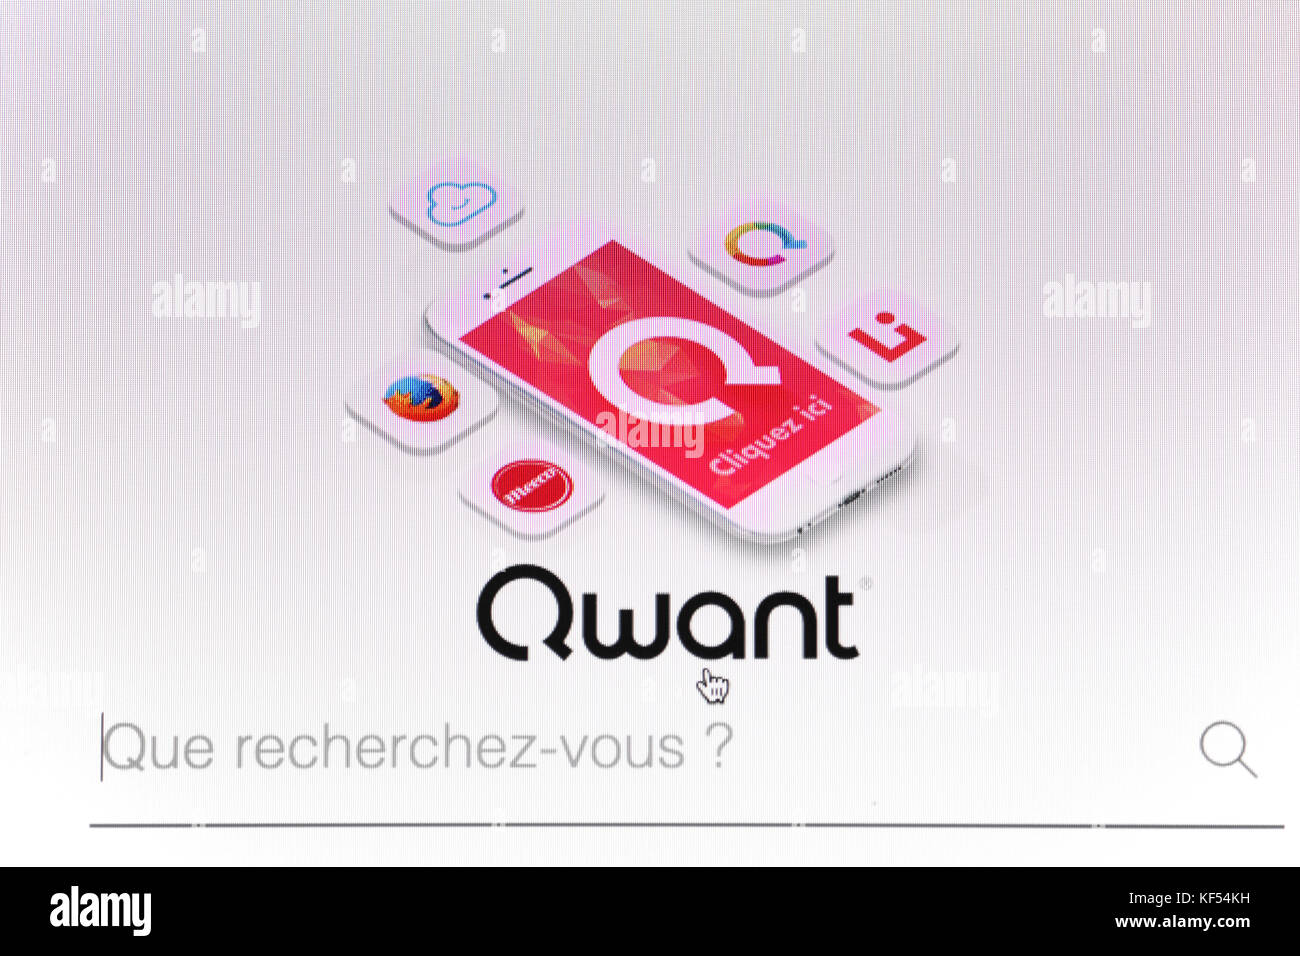 Search Engine High Resolution Stock Photography And Images Alamy Your alamy stock images are ready. https www alamy com stock image qwant french search engine 164226597 html